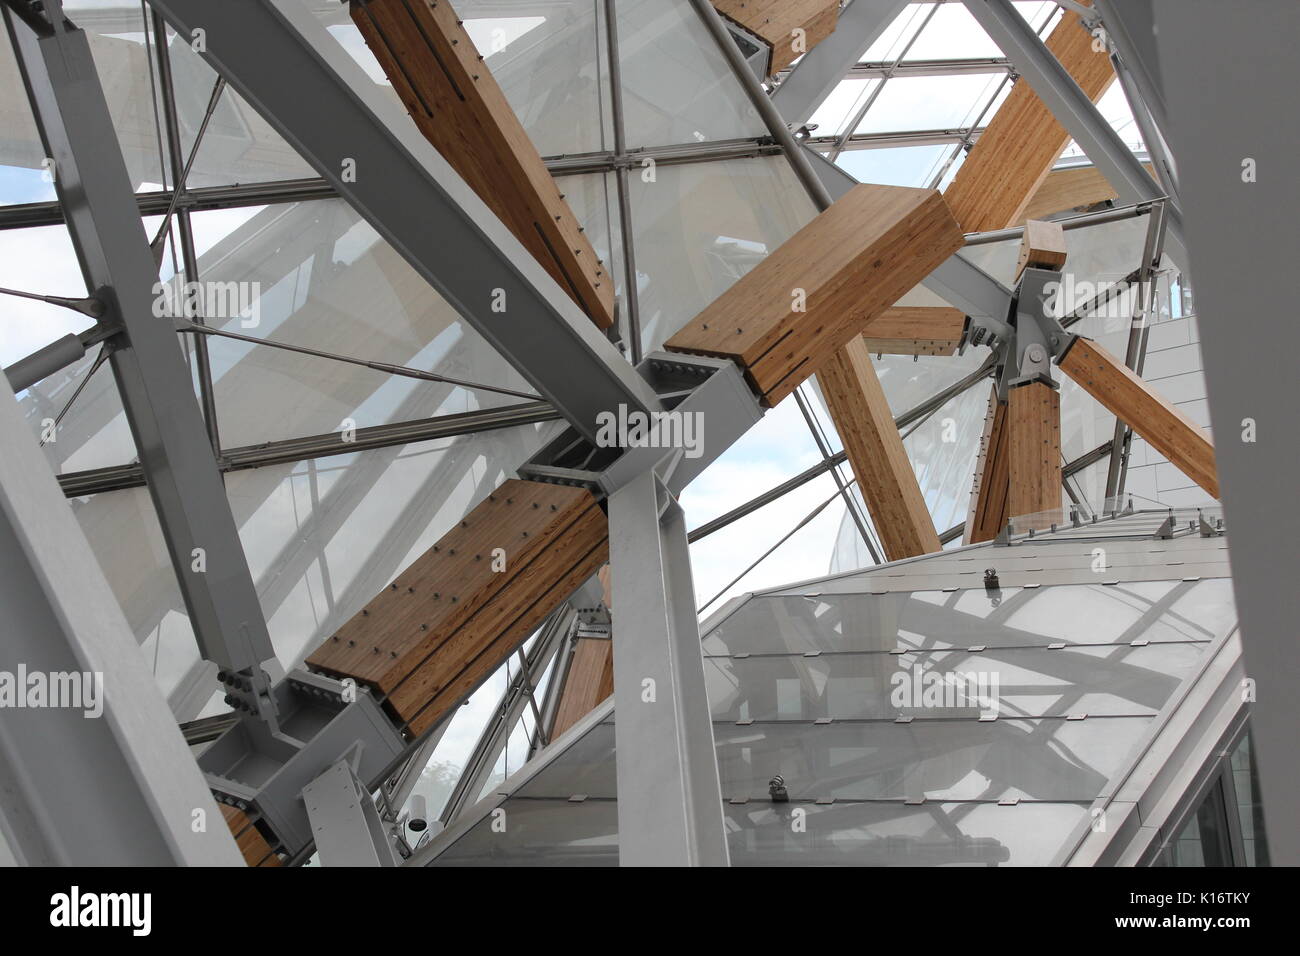 Frank Gehry Louis Vuitton Foundation structure detail Stock Photo: 155659055 - Alamy